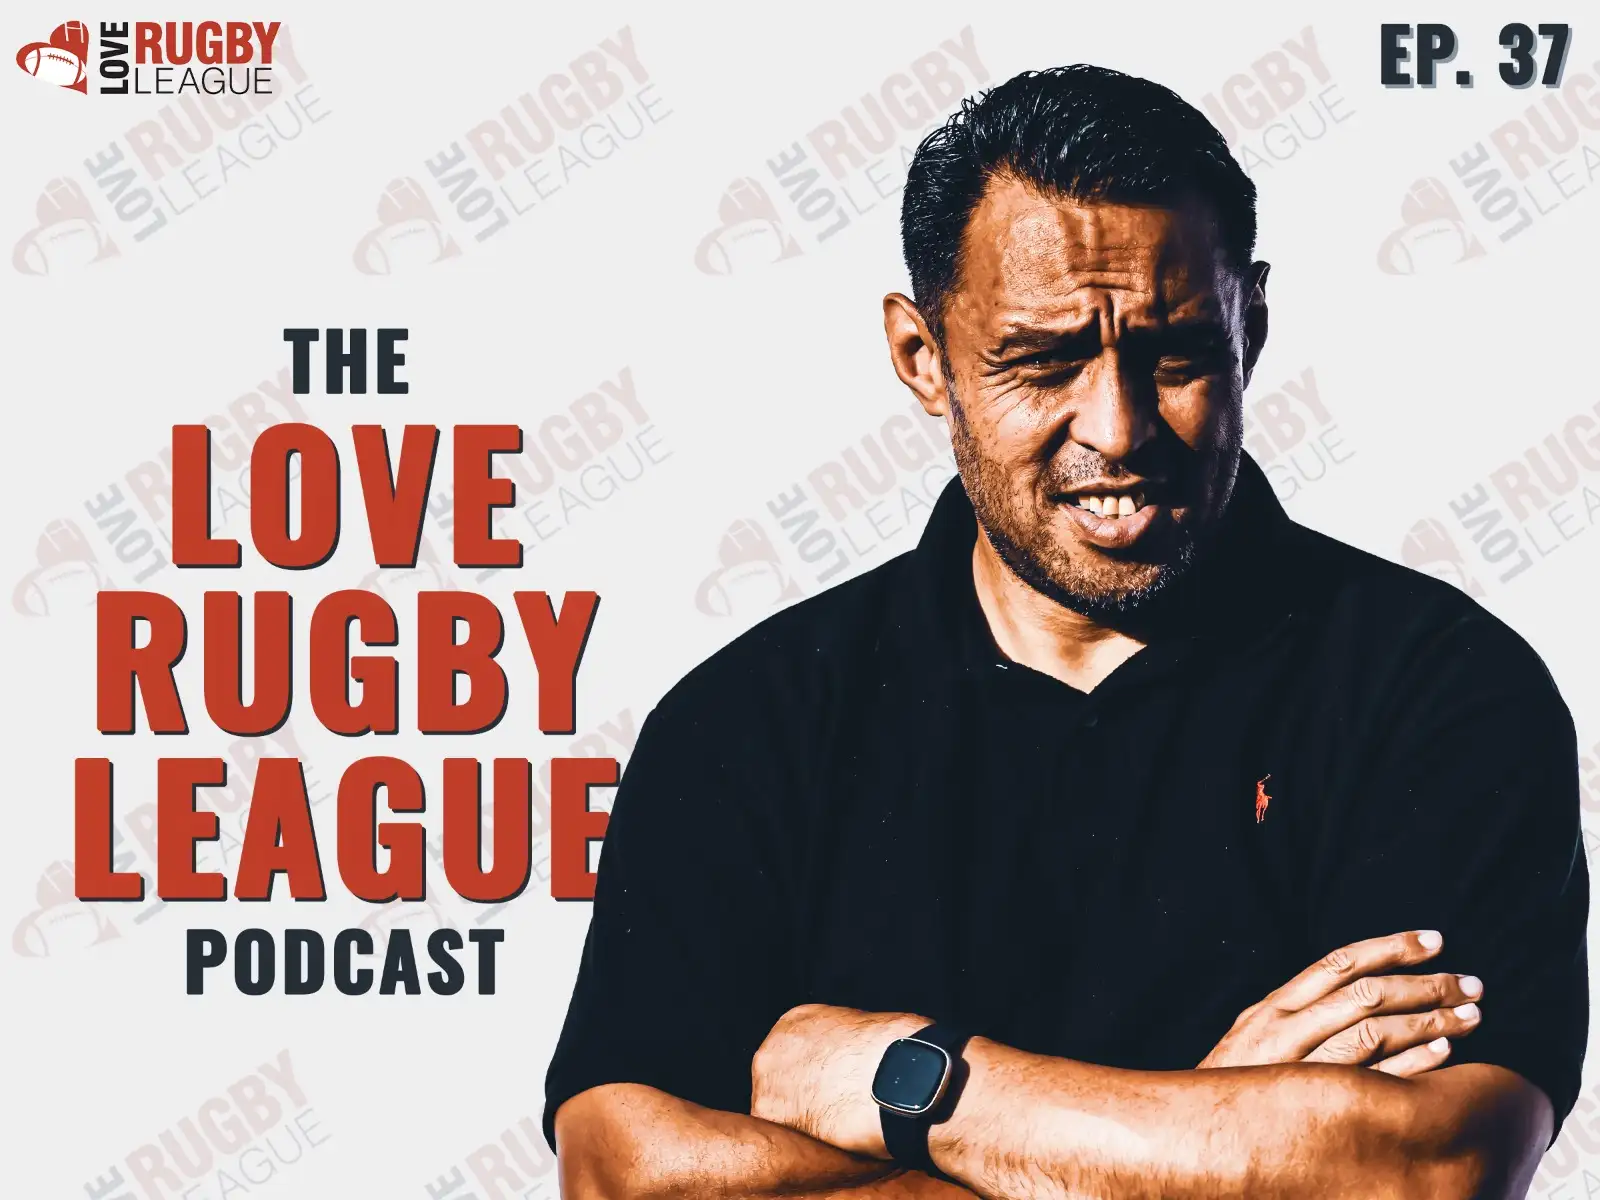 Podcast: Willie Poching on Samoan pride, making up with Matt Parish and how to beat England